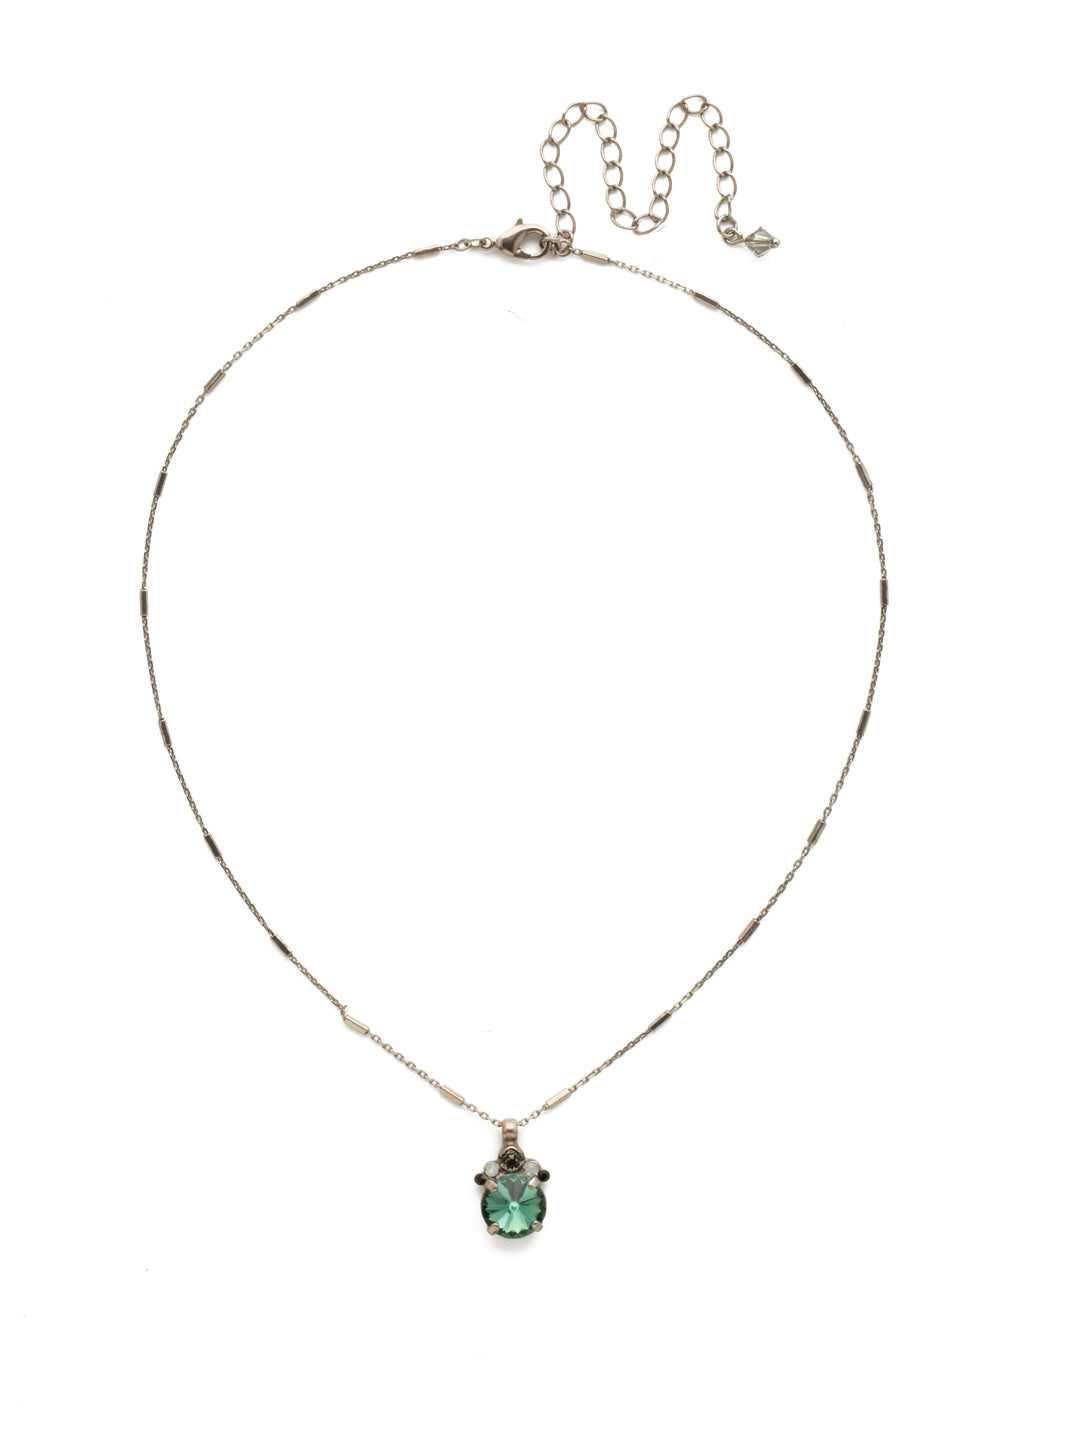 Crowning Around Necklace - NDN78ASGDG - Show them you're serious about sparkle with this demure pendant that features a round rivoli crystal crowned with petite circular stones.